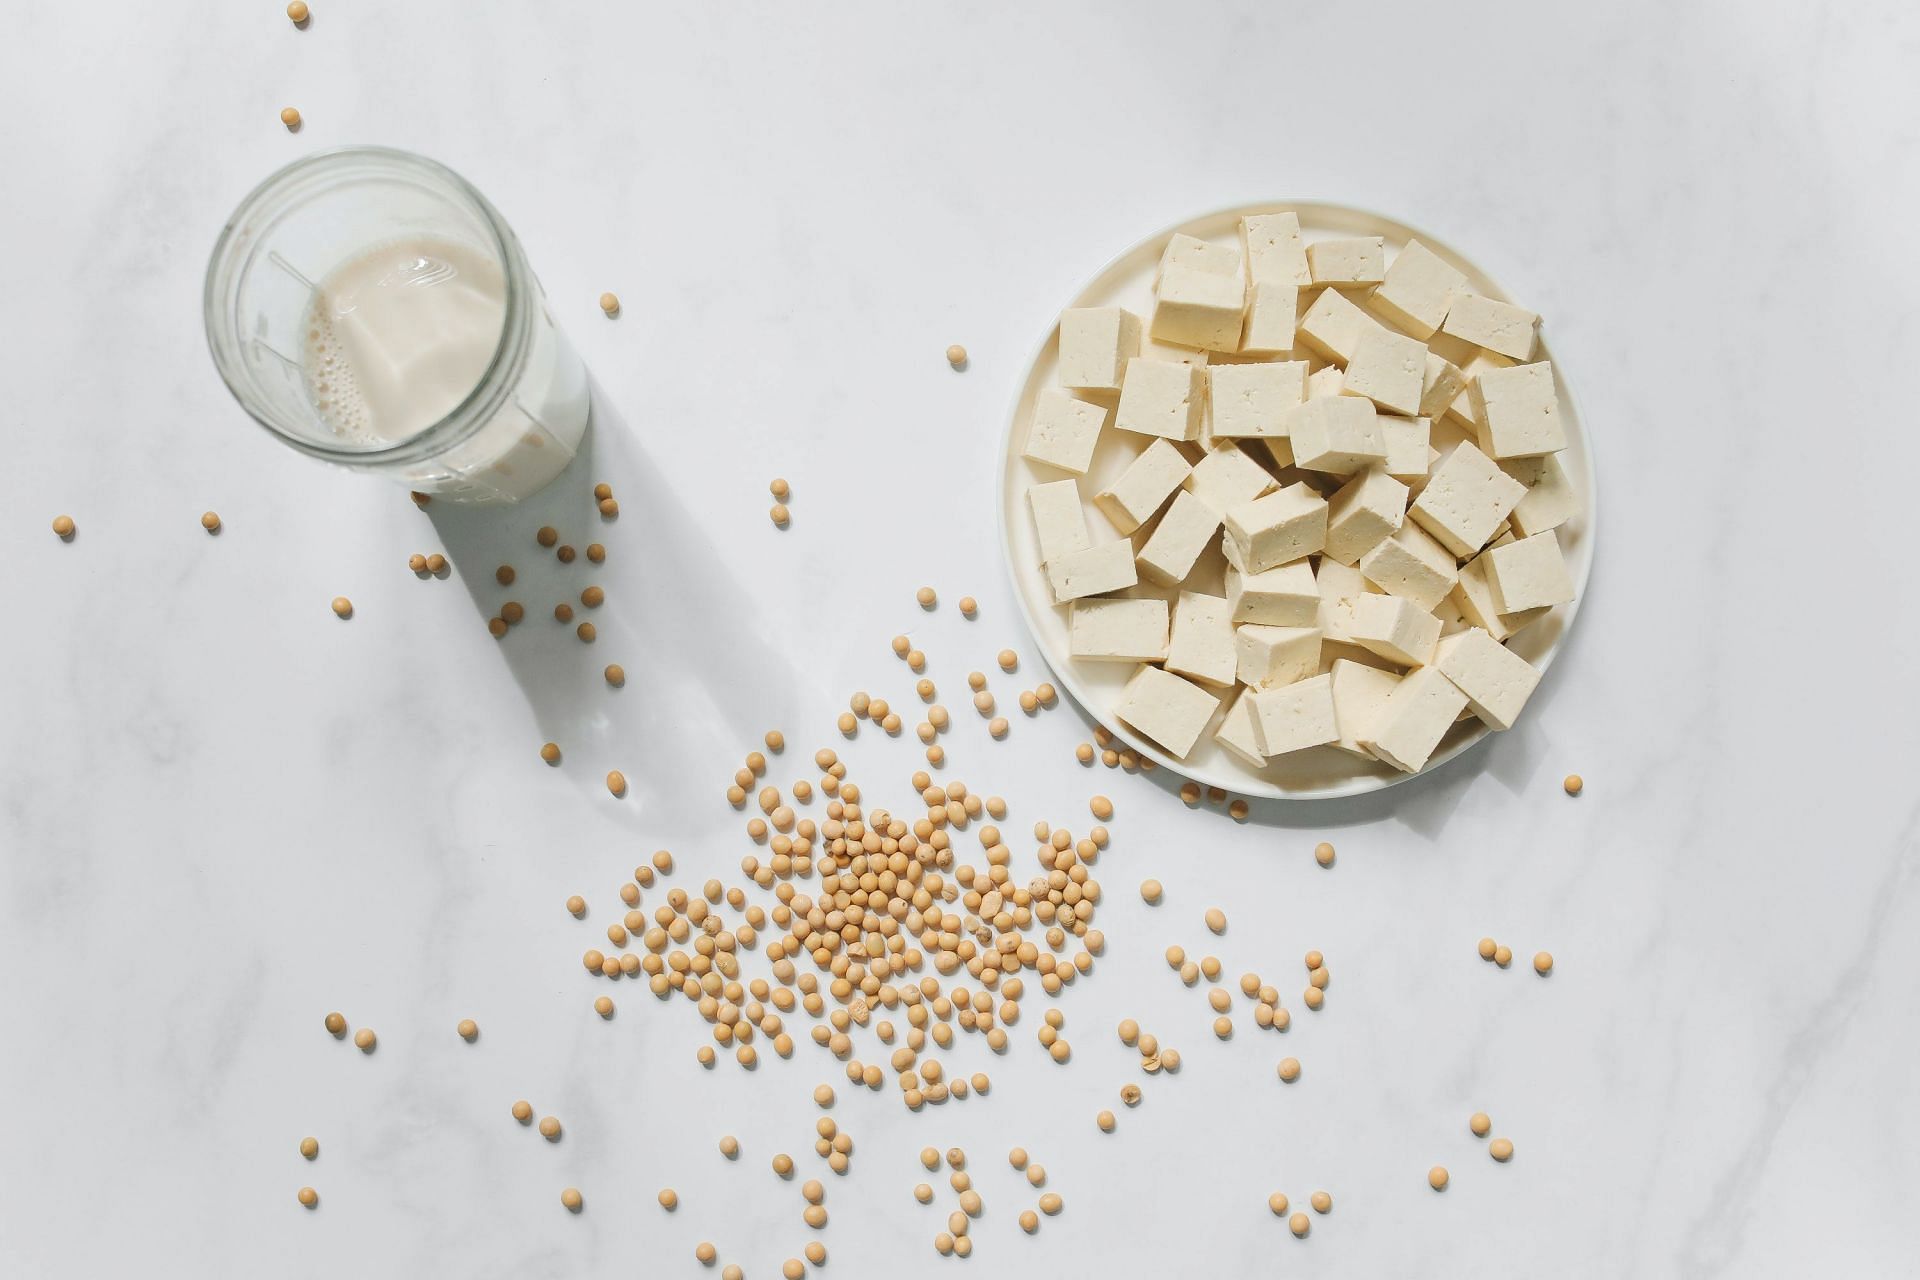 Tofu can be a great source pf protein. (Image via Pexels/Polina Tankilevitch)